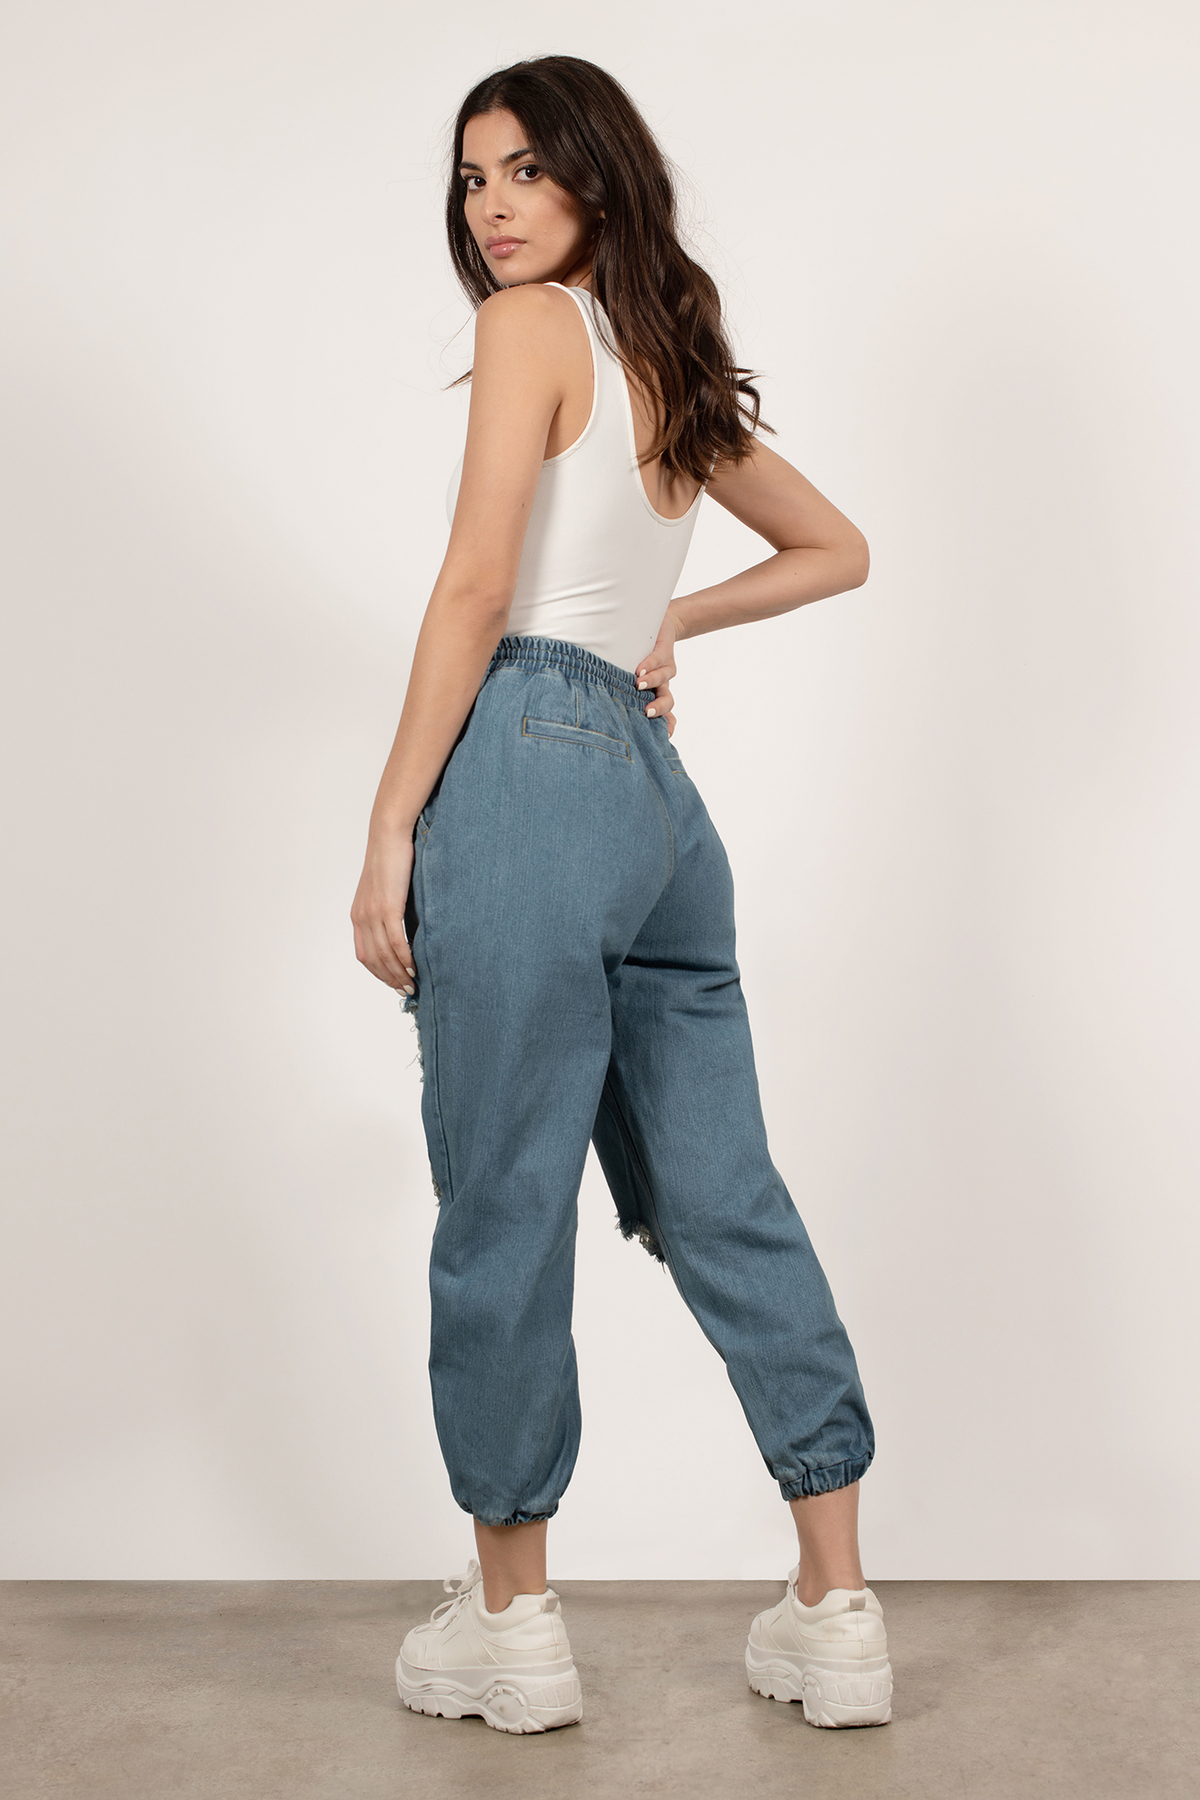 Lucky You Denim Jogger Jeans in Medium Washed - $118 | Tobi US